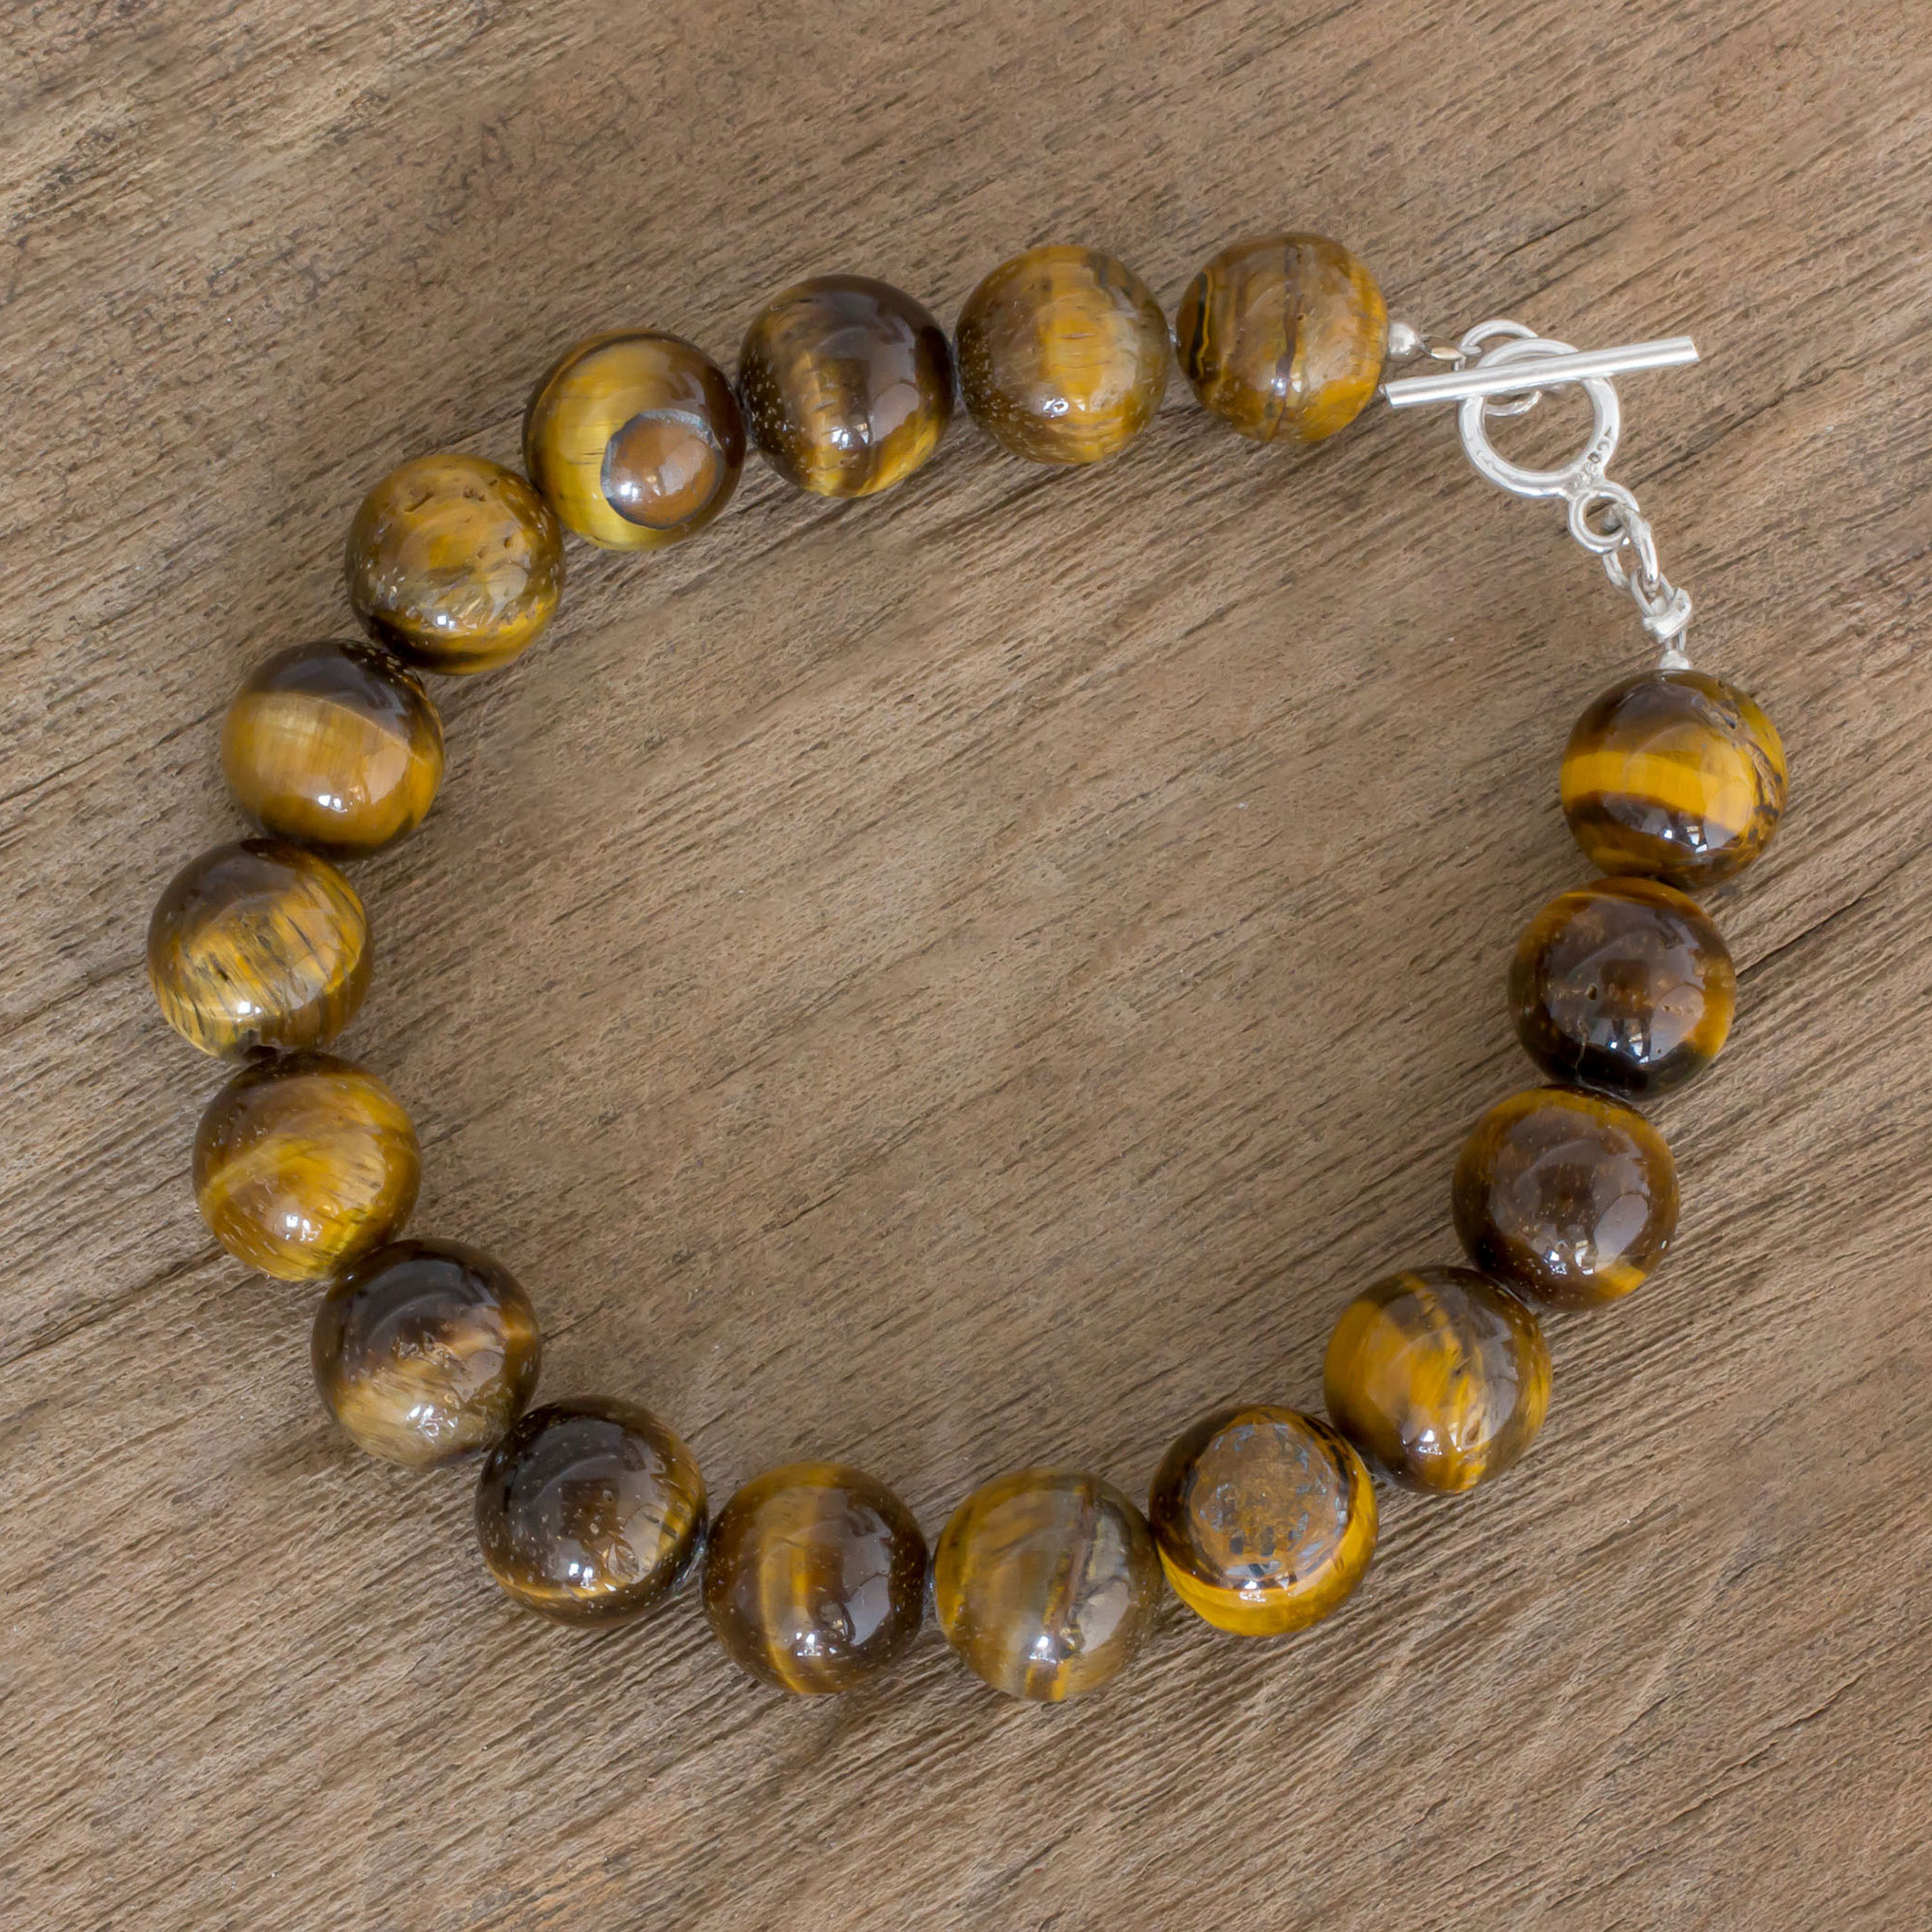 Details about   Tiger's Eye 12mm Gemstone Bead Necklace Single Strand w/ Sterling Silver Clasp